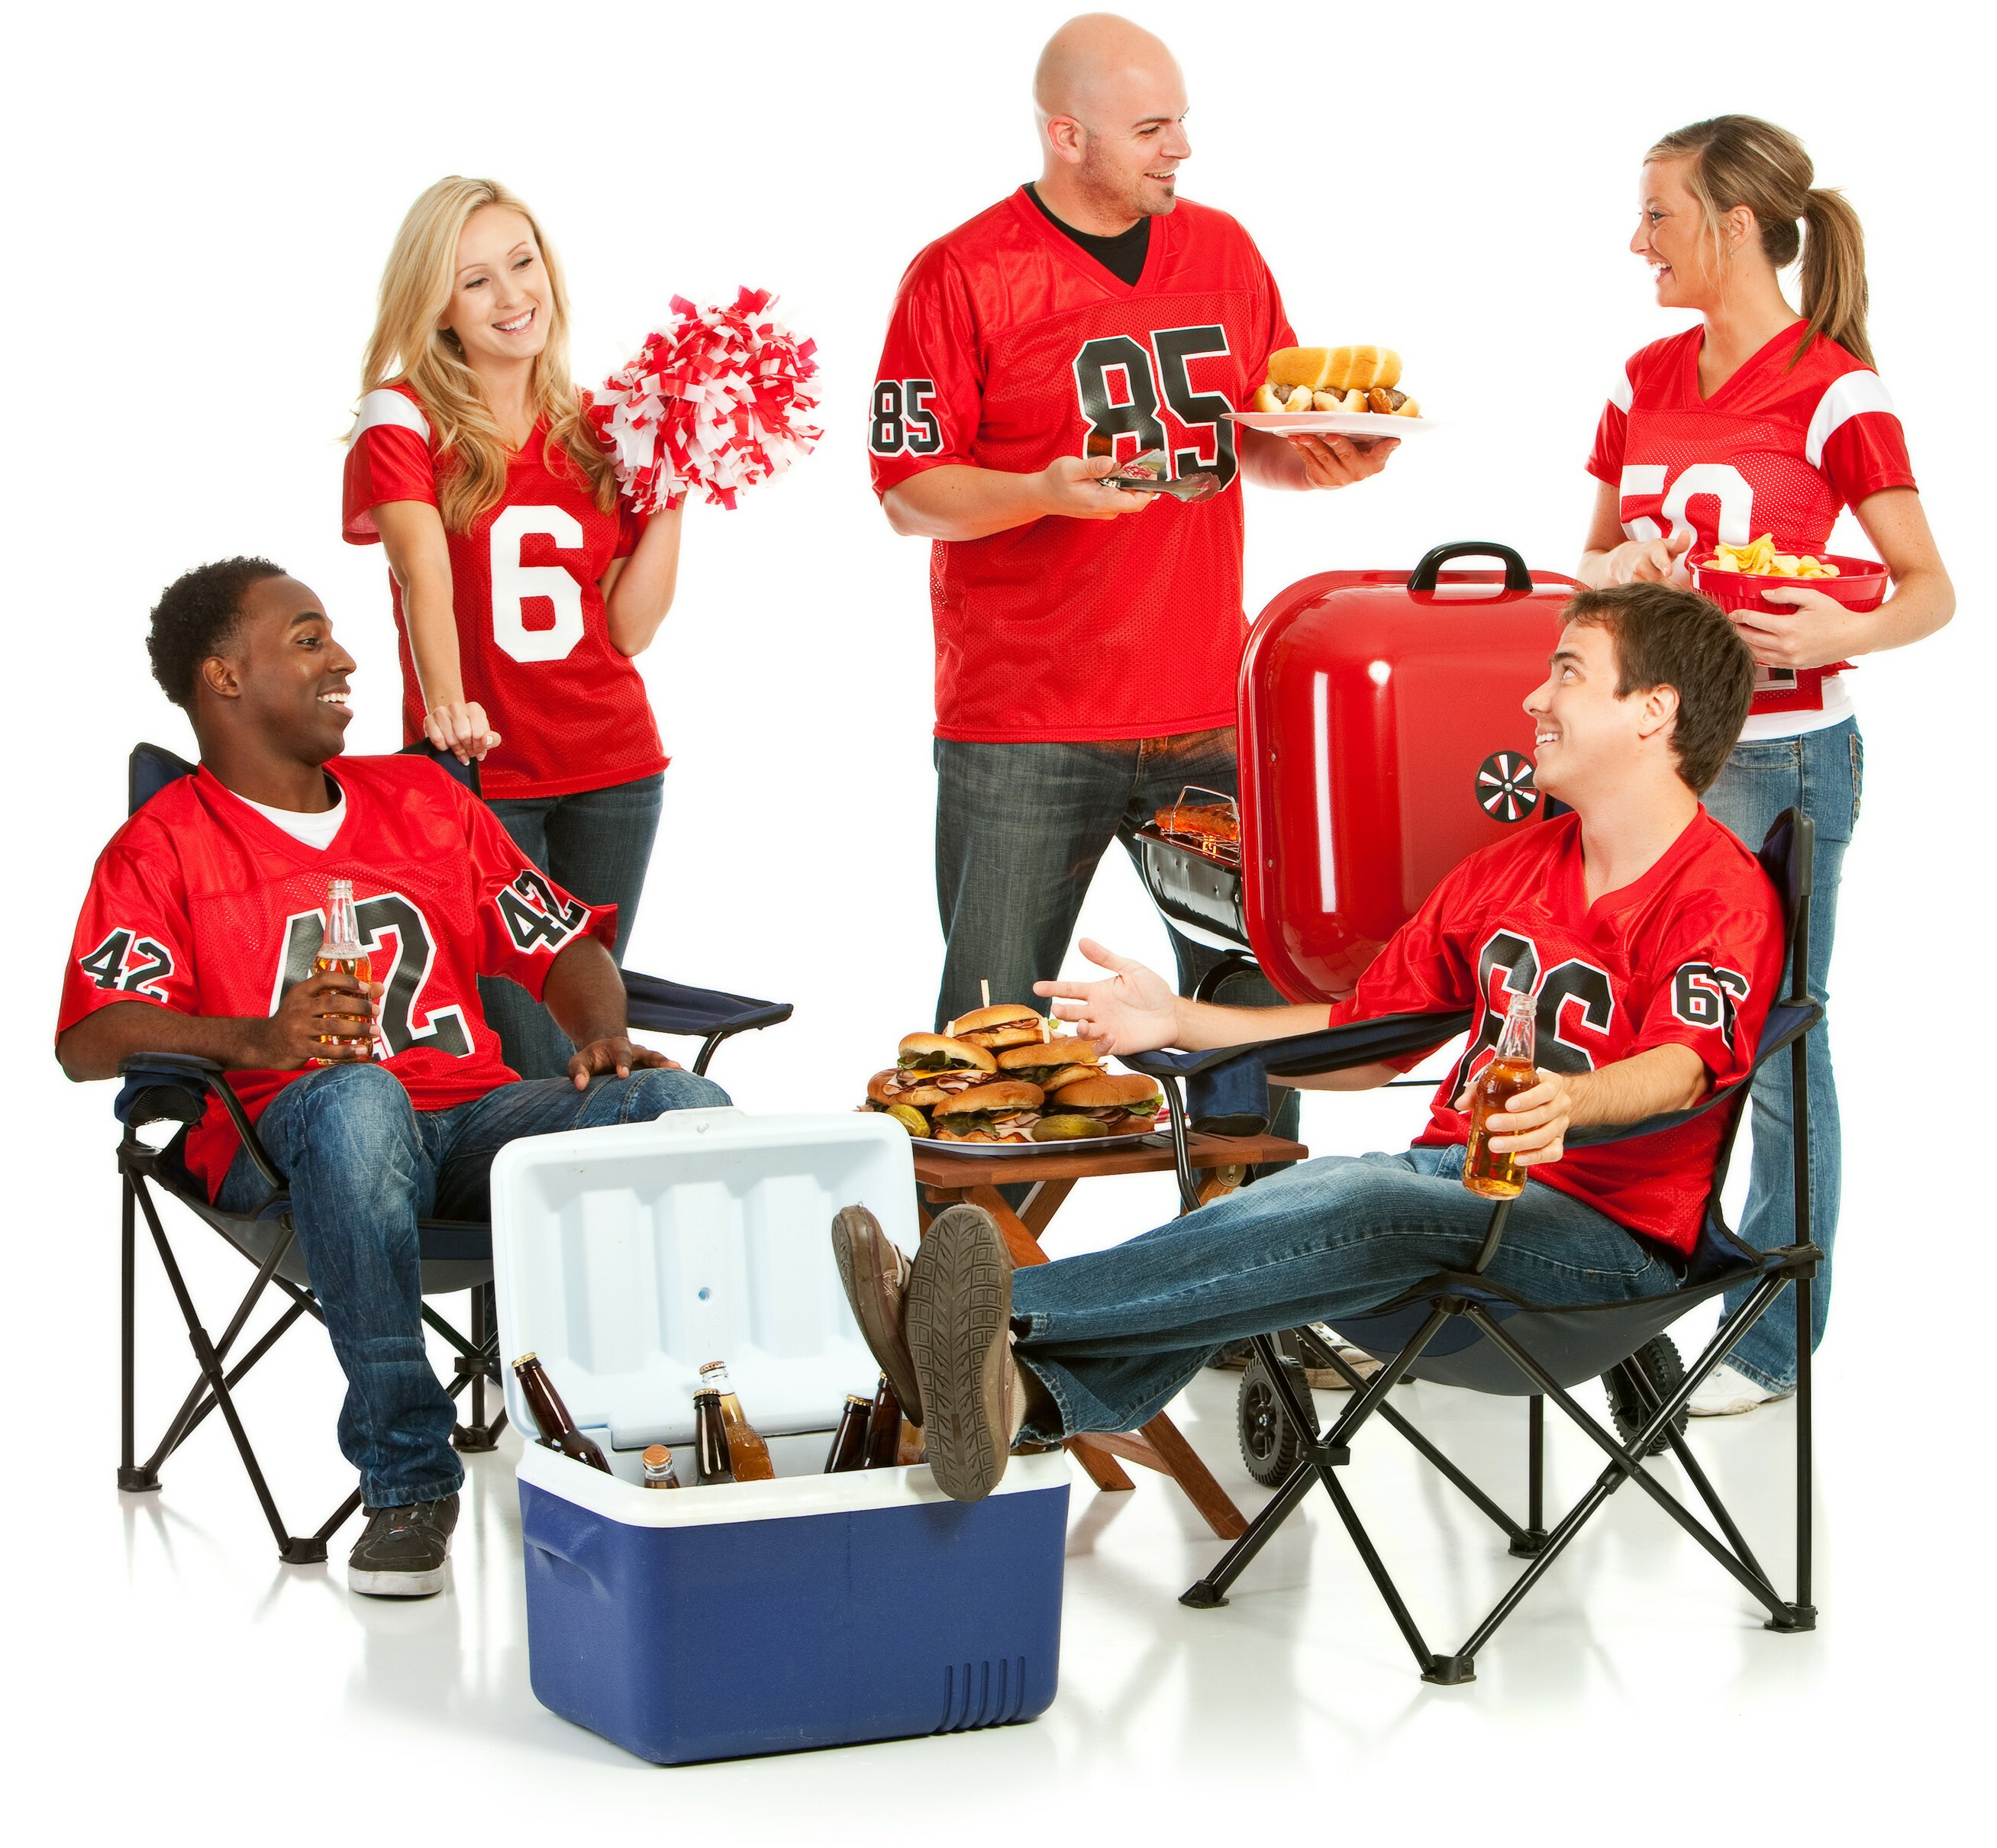 Ready to Rock the Stadium? Score with Custom Tailgating Accessories!